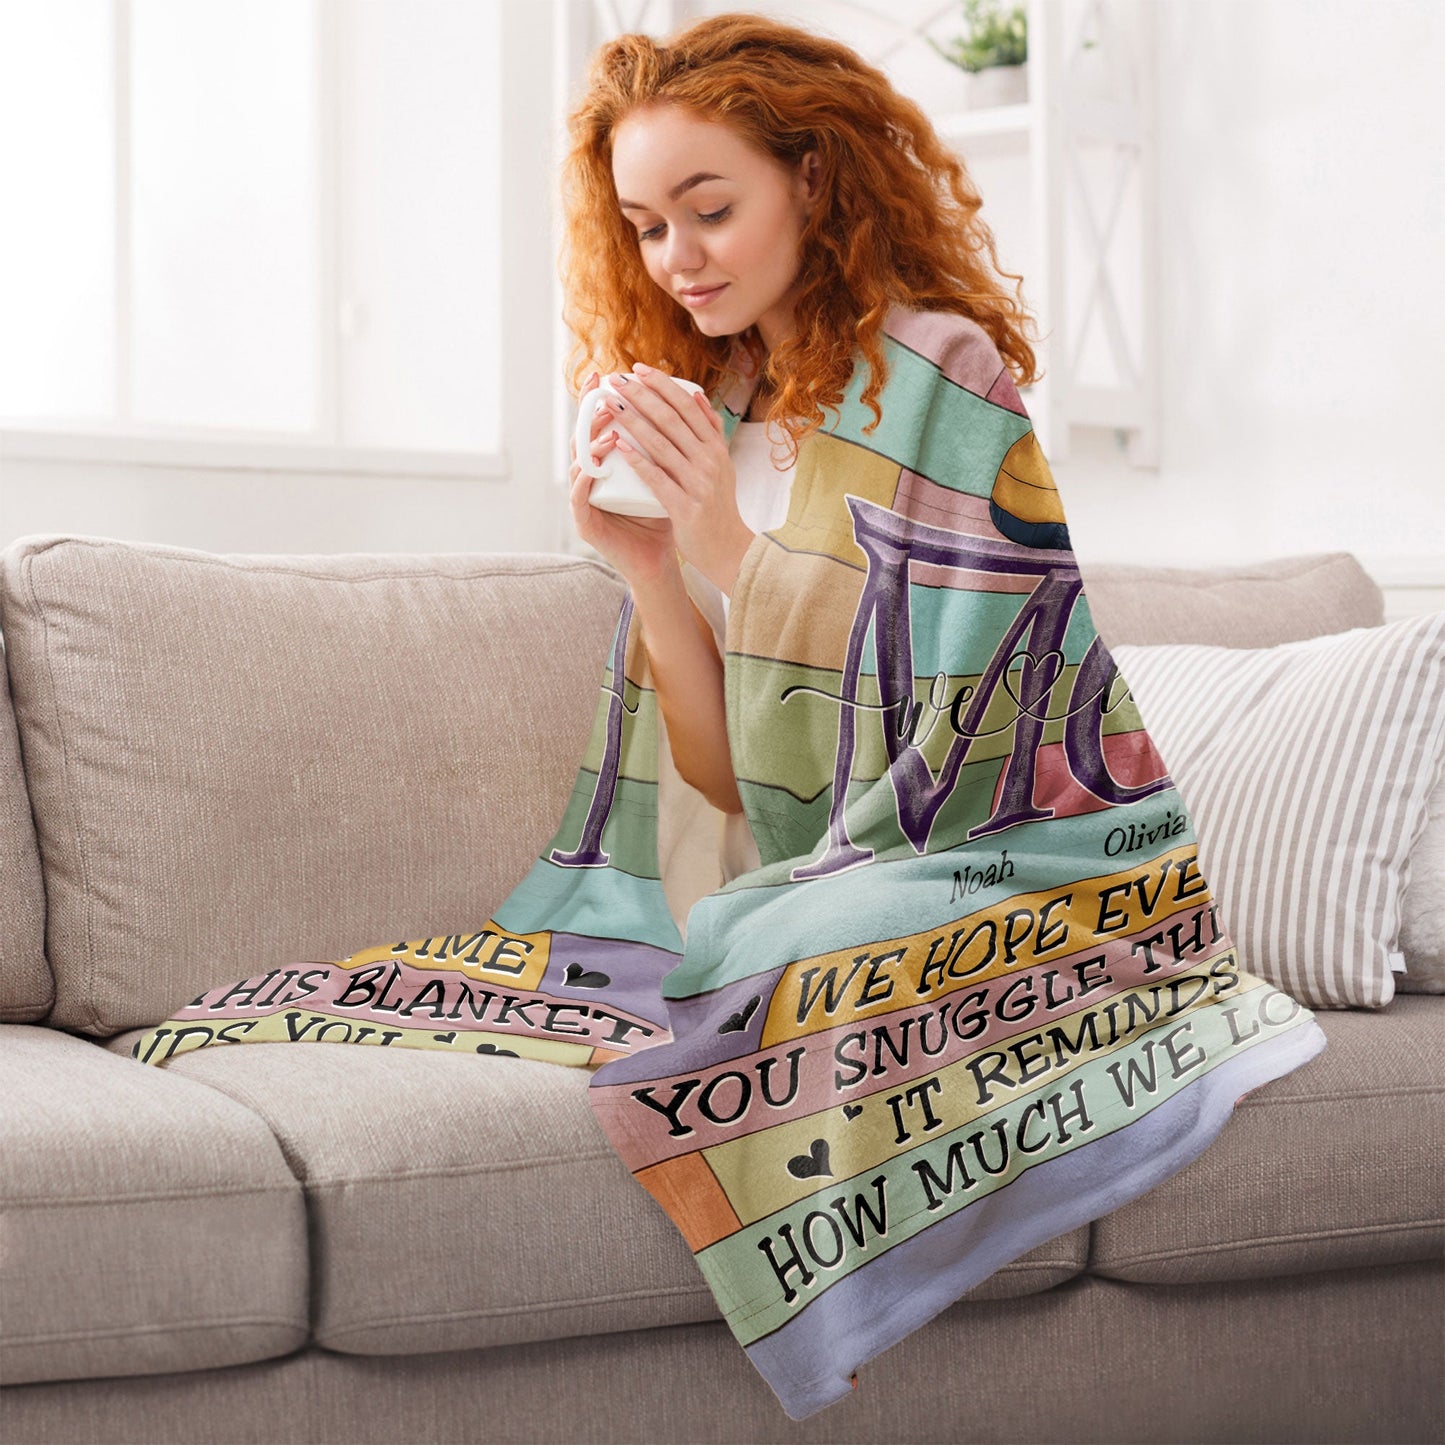 Whenever You Snuggle This Blanket - Personalized Blanket - Birthday Xmas Christmas Gift For Mom, Mother, Gift From Husband To Wife